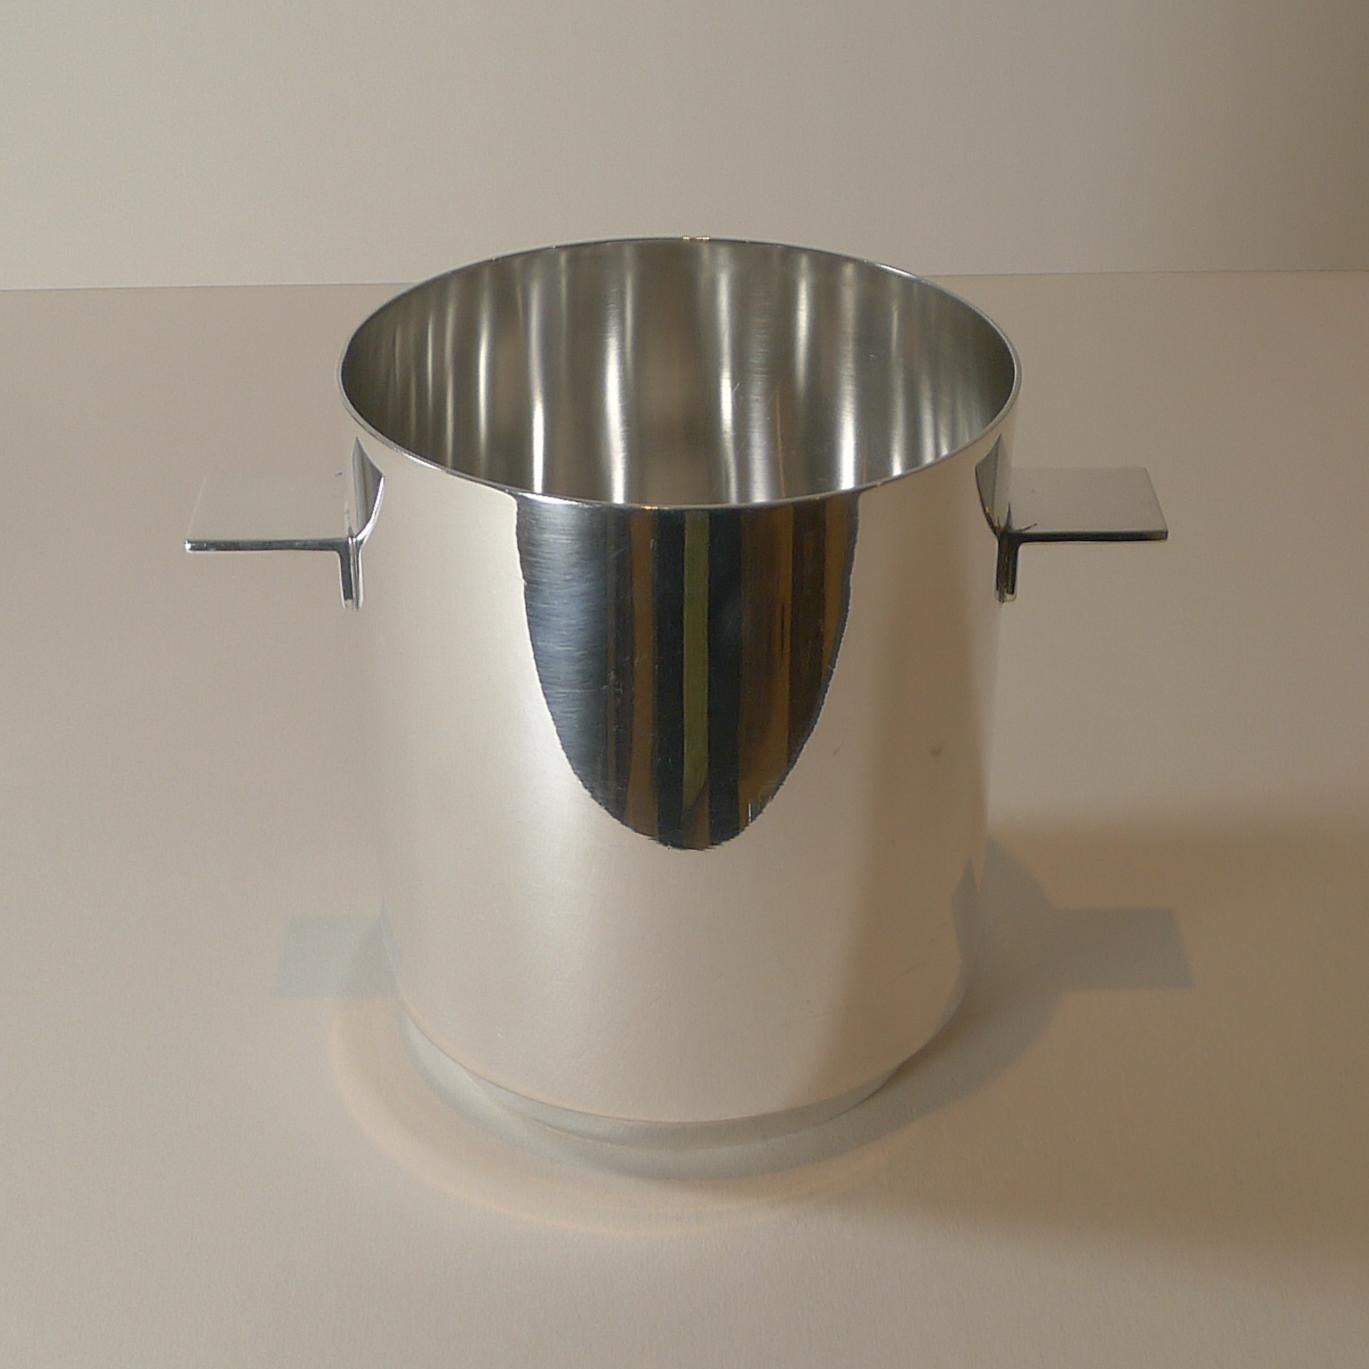 A fabulous ice minimalist / modernist silver plated ice bucket, I believe in the Windsor pattern, designed c.1960
by the world famous Lino Sabatinni, the preeminent figure in modern Italian silver and metalware design.

The inside is complete